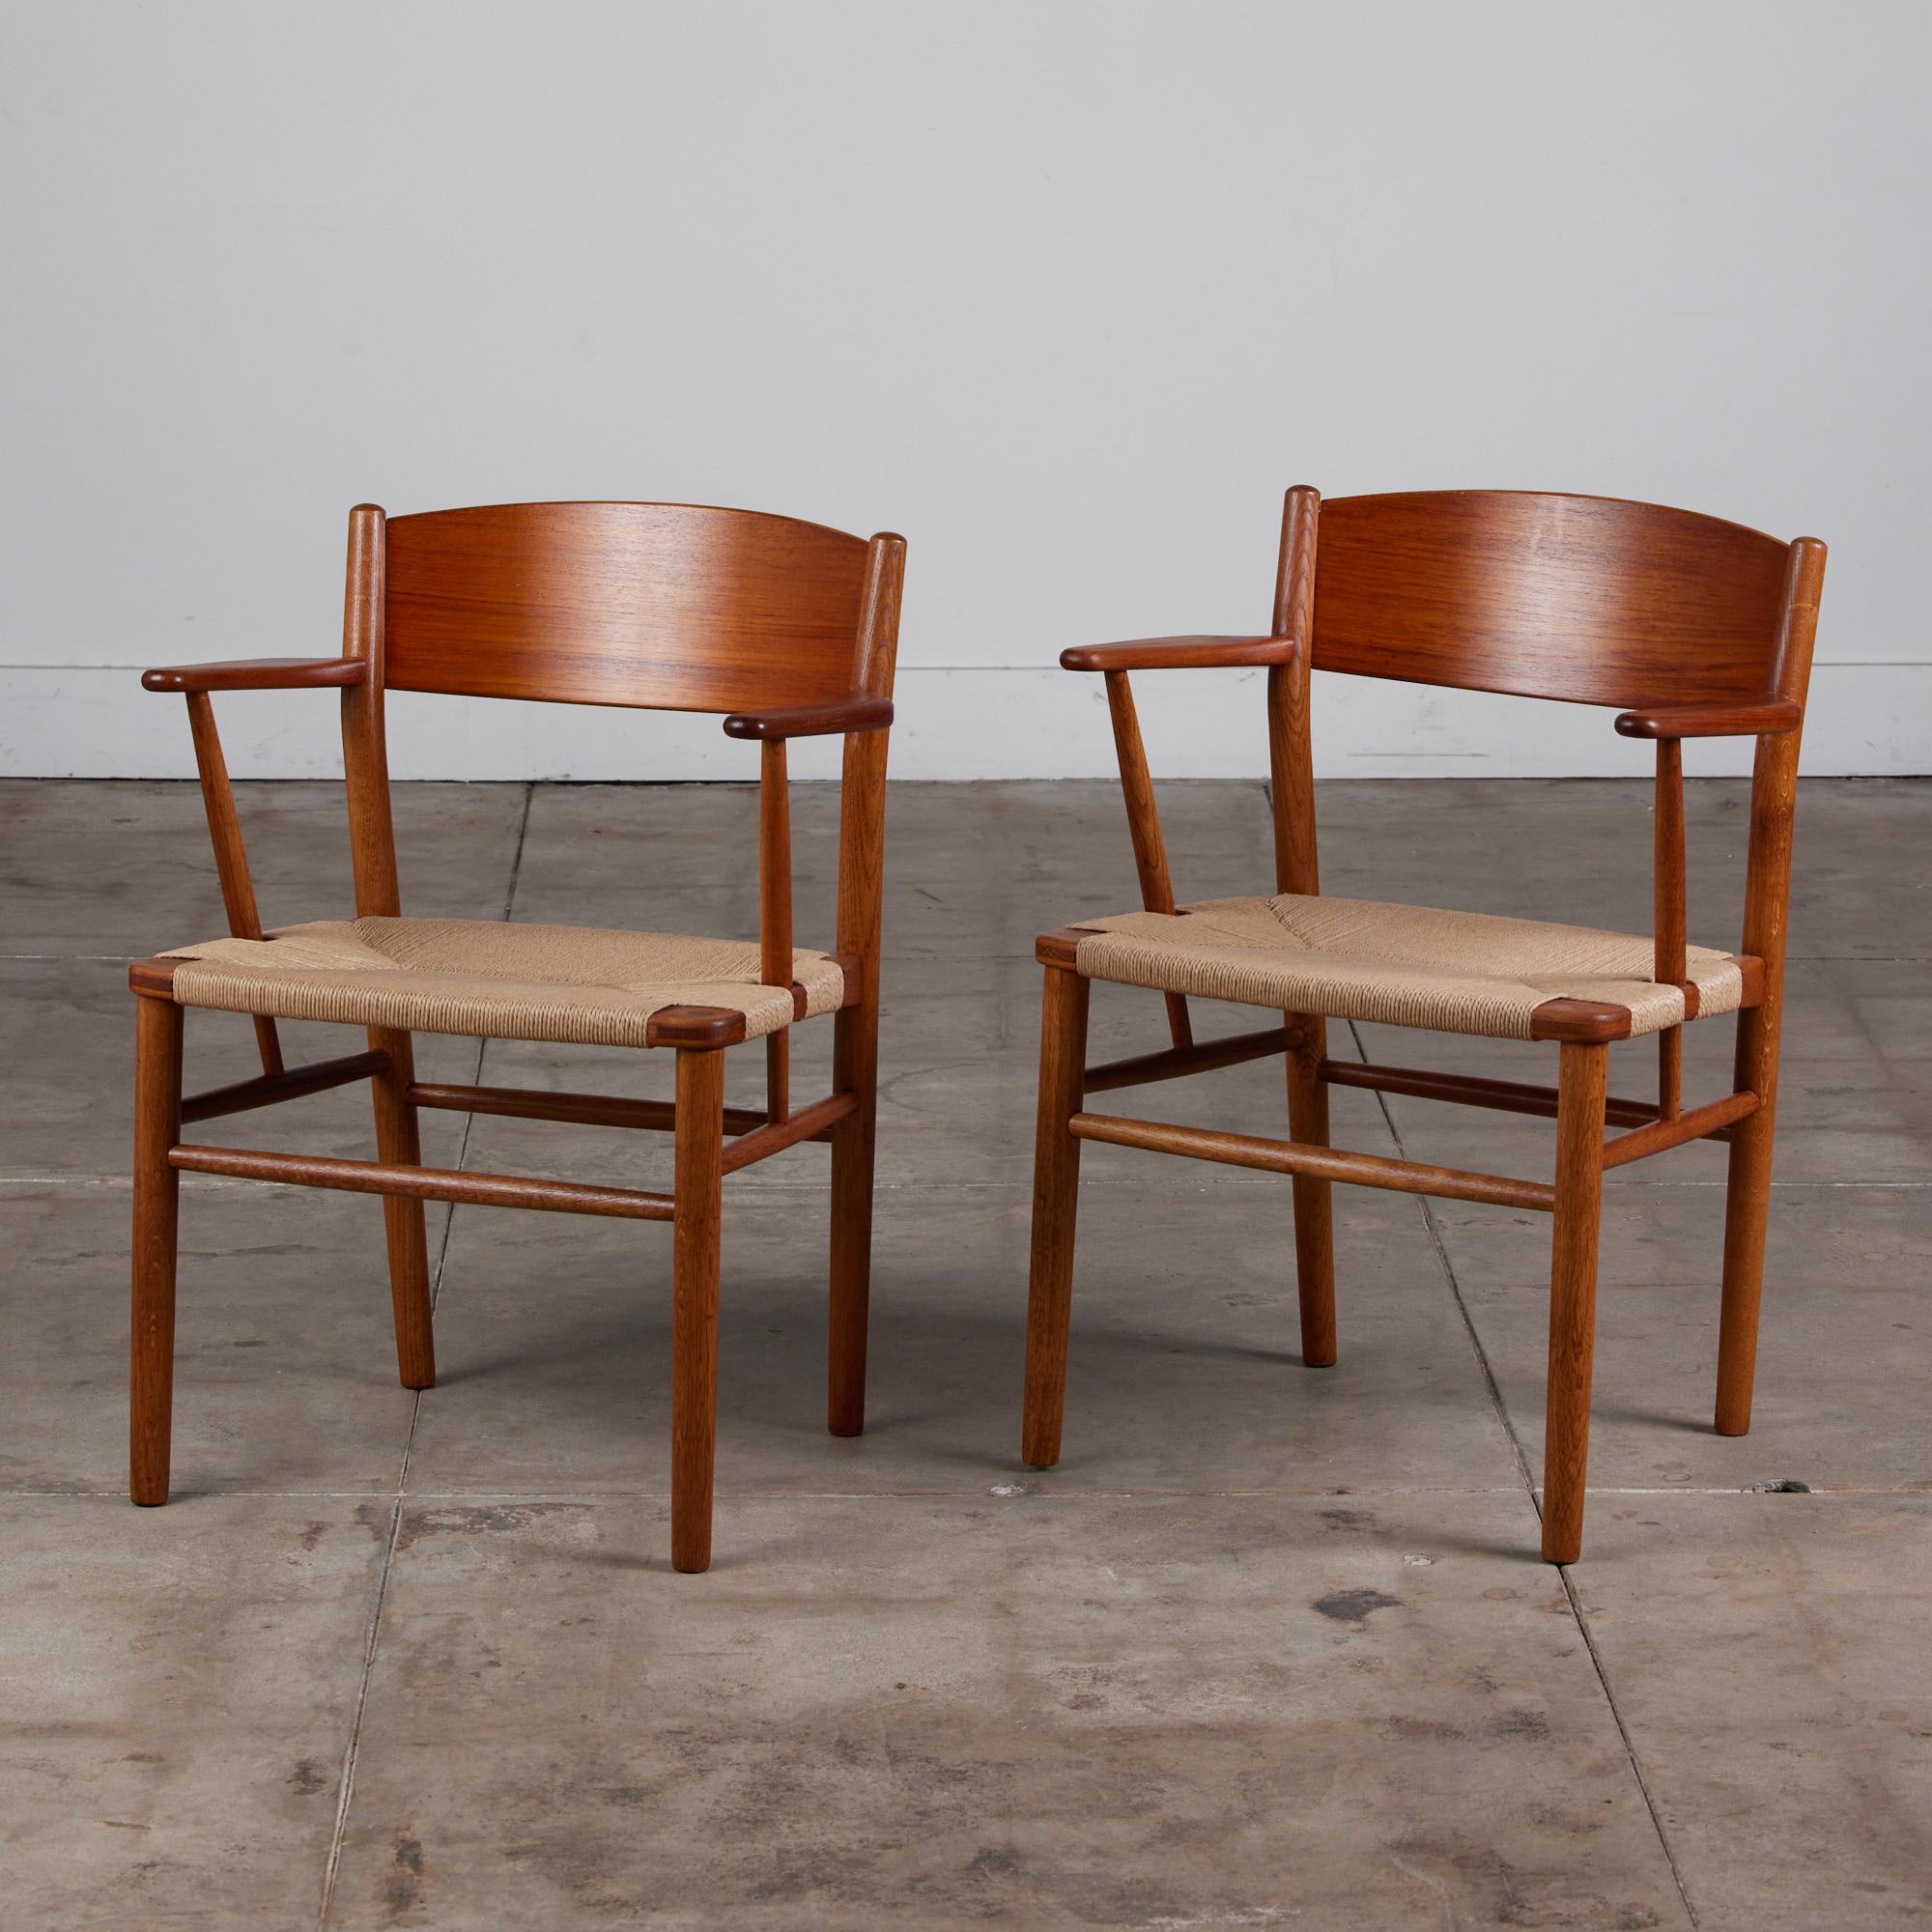 A pair of Børge Mogensen arm chairs, Denmark, c.1950s, feature hand woven Danish paper cord seats. The chair backs made of teak, while the legs and frame are made of oak, creating a slight color contrast. 

Dimensions: 23